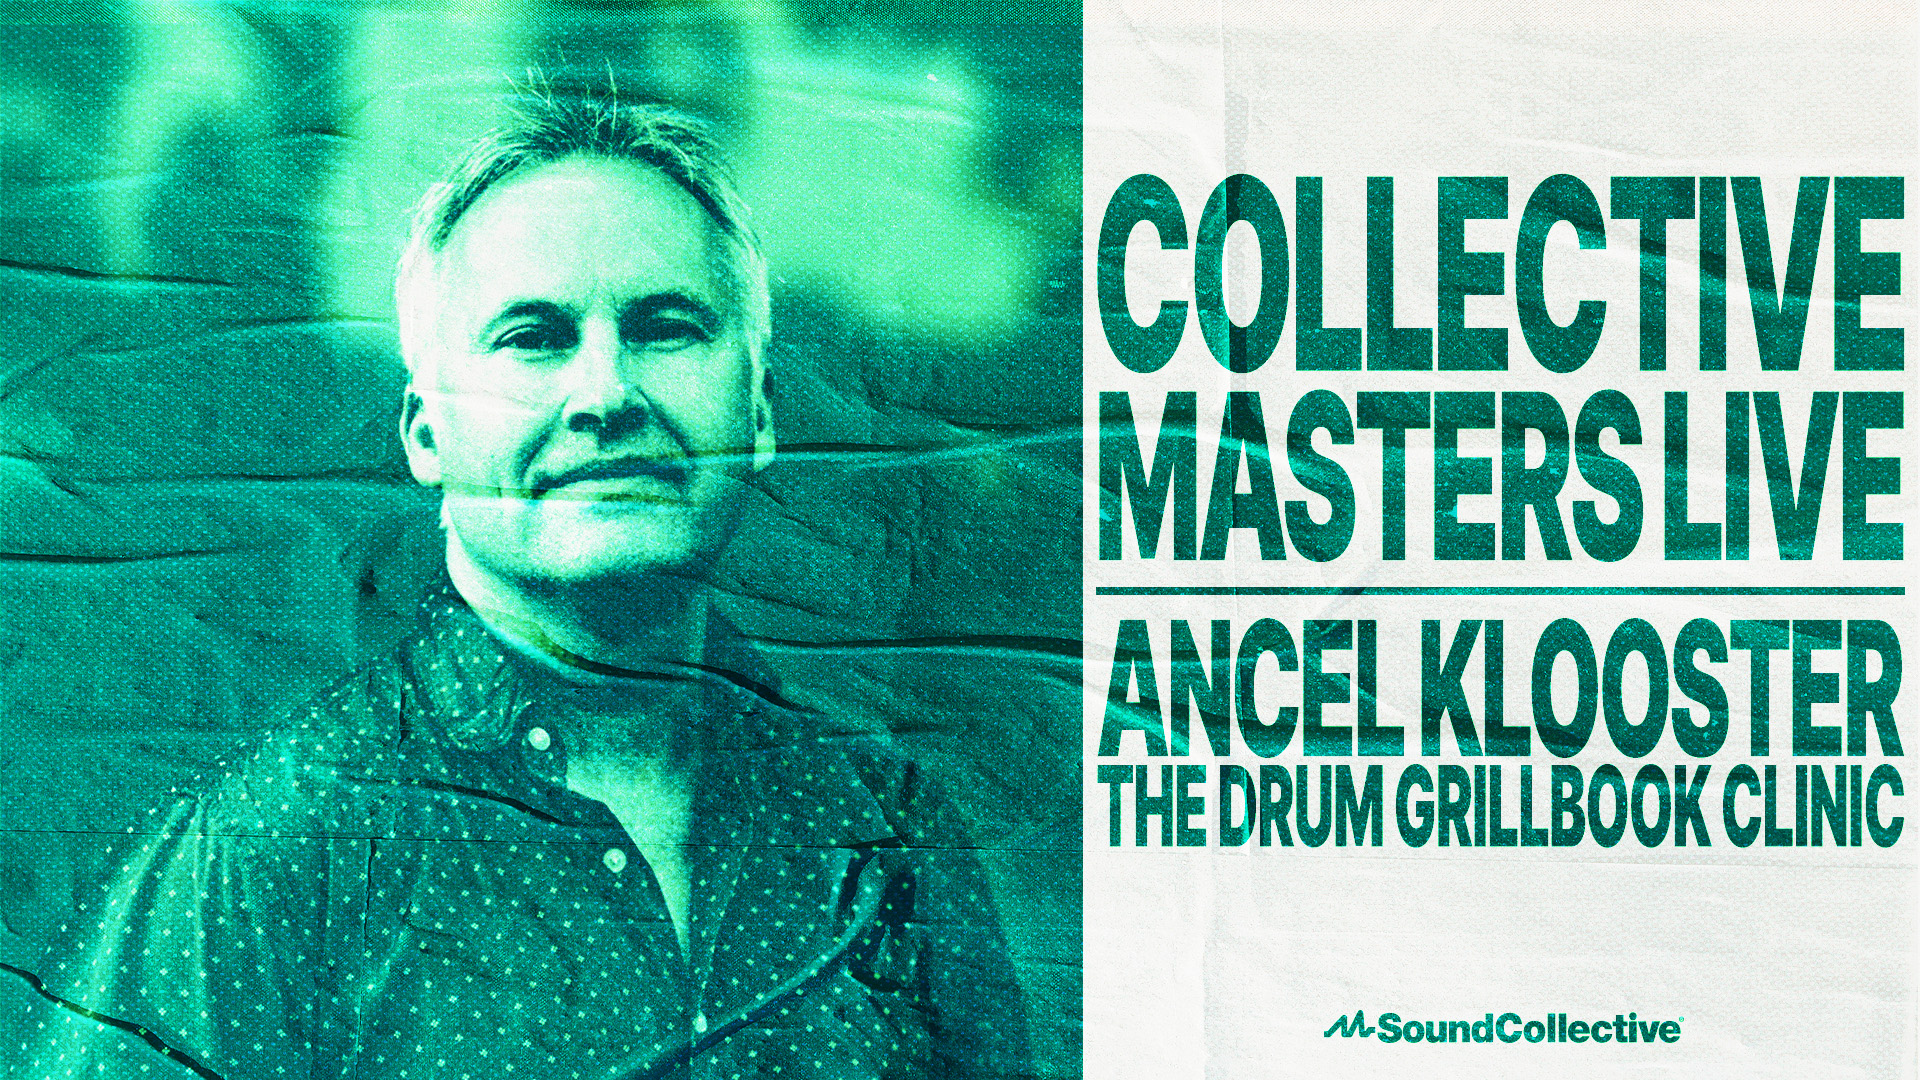 Ancel Klooster,The Drum Grillbook,The Collective,SoundCollective, Ancel Klooster: The Drum Grillbook Clinic, SoundCollective